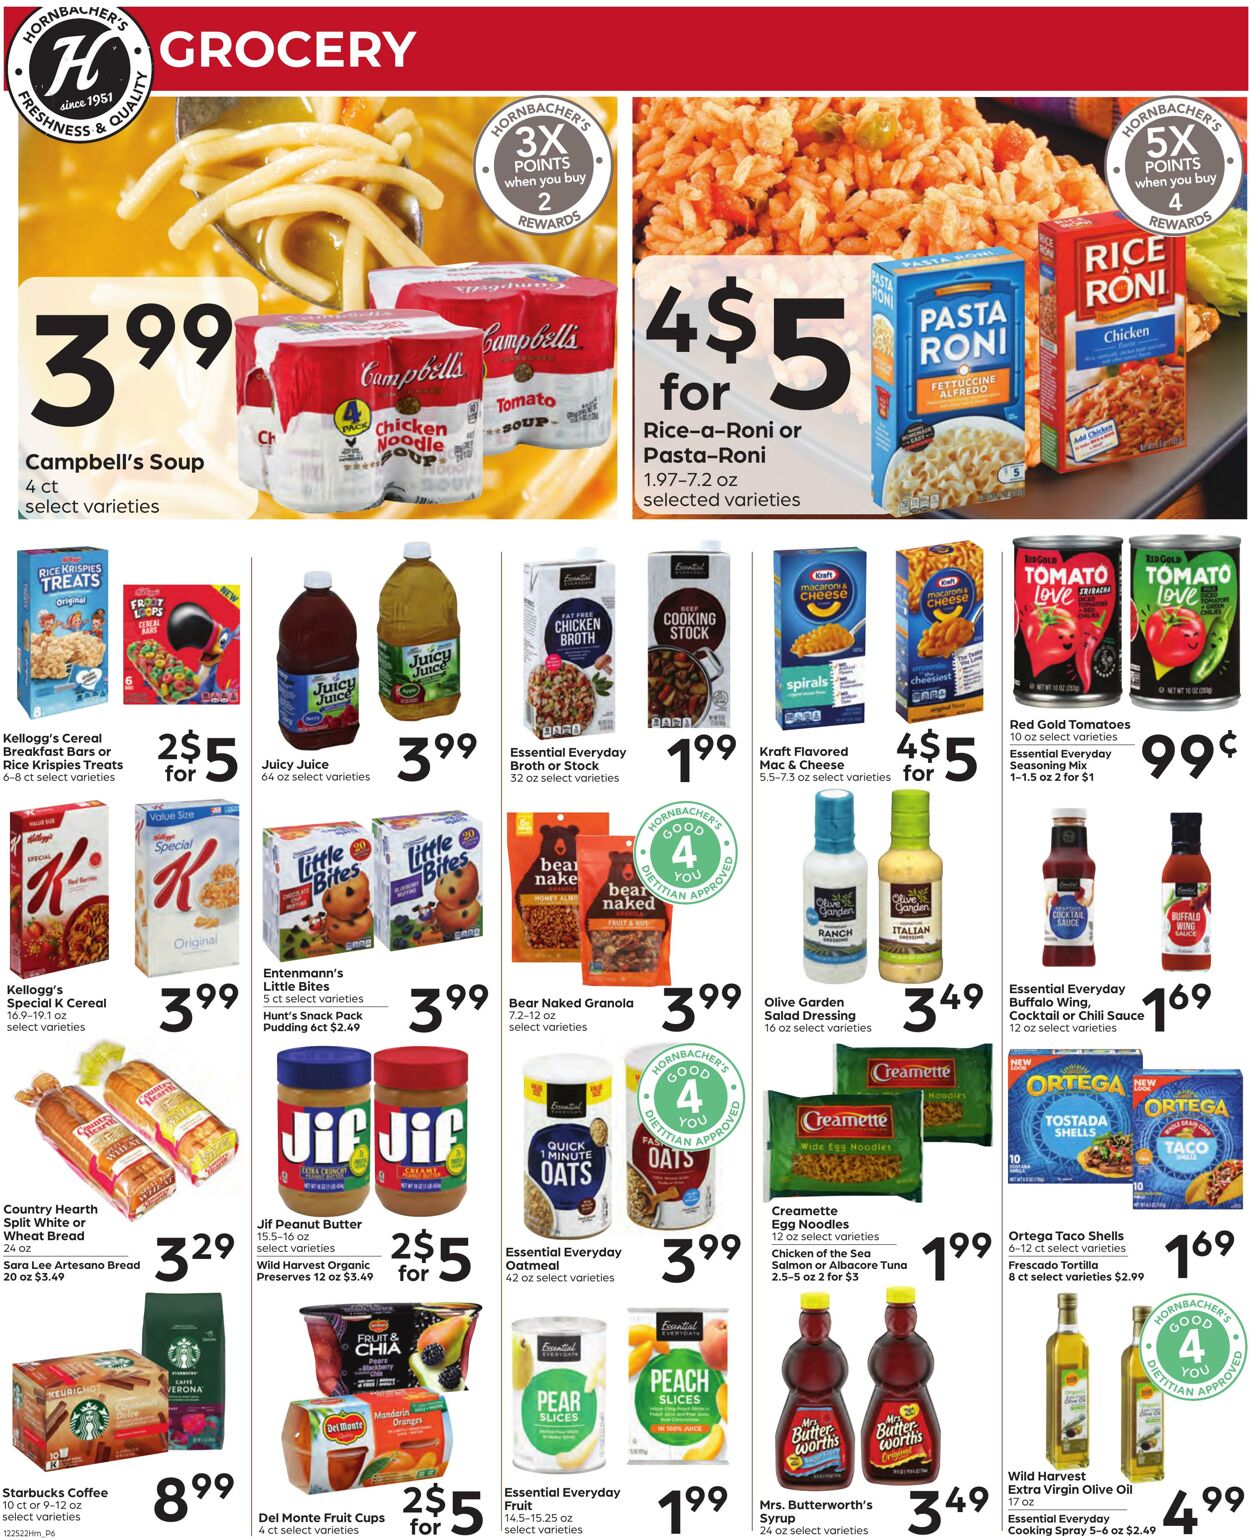 Weekly ad Hornbacher's 01/25/2023 - 01/31/2023